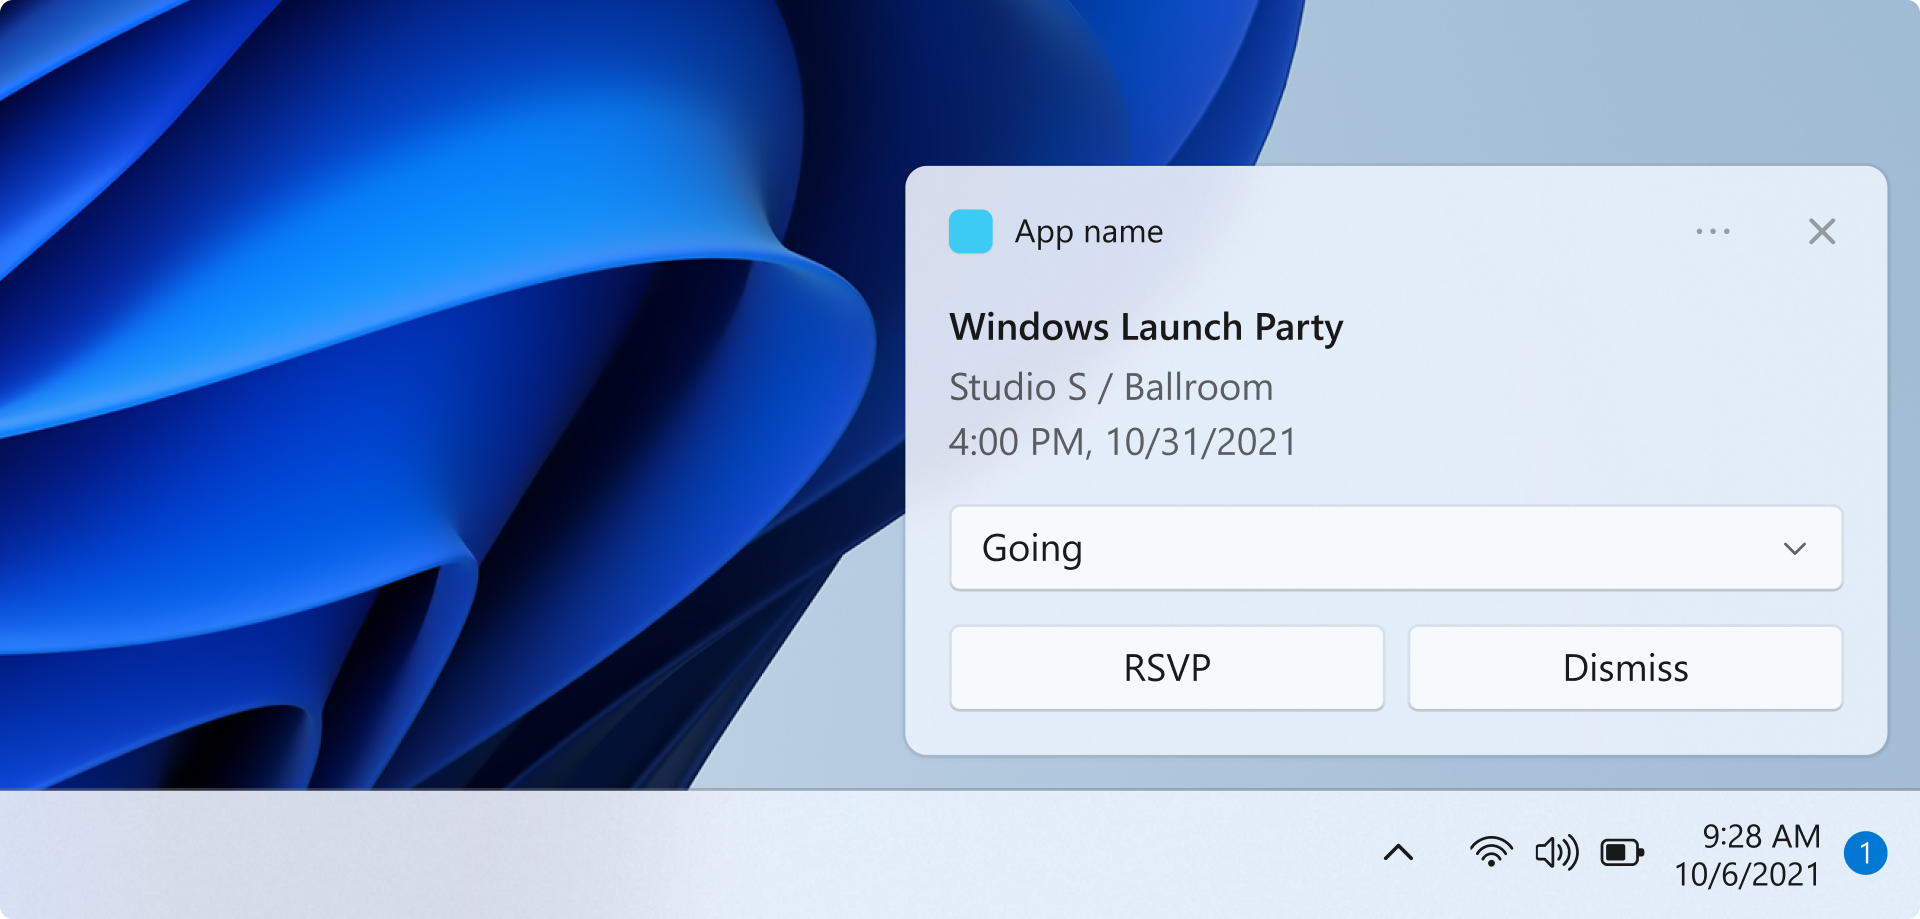 A screen capture showing an app notification above the task bar. The notification is a reminder for an event. The app name, event name, event time, and event location are shown. A selection input displays the currently selected value, "Going". There are two buttons labeled "RSVP" and "Dismiss"